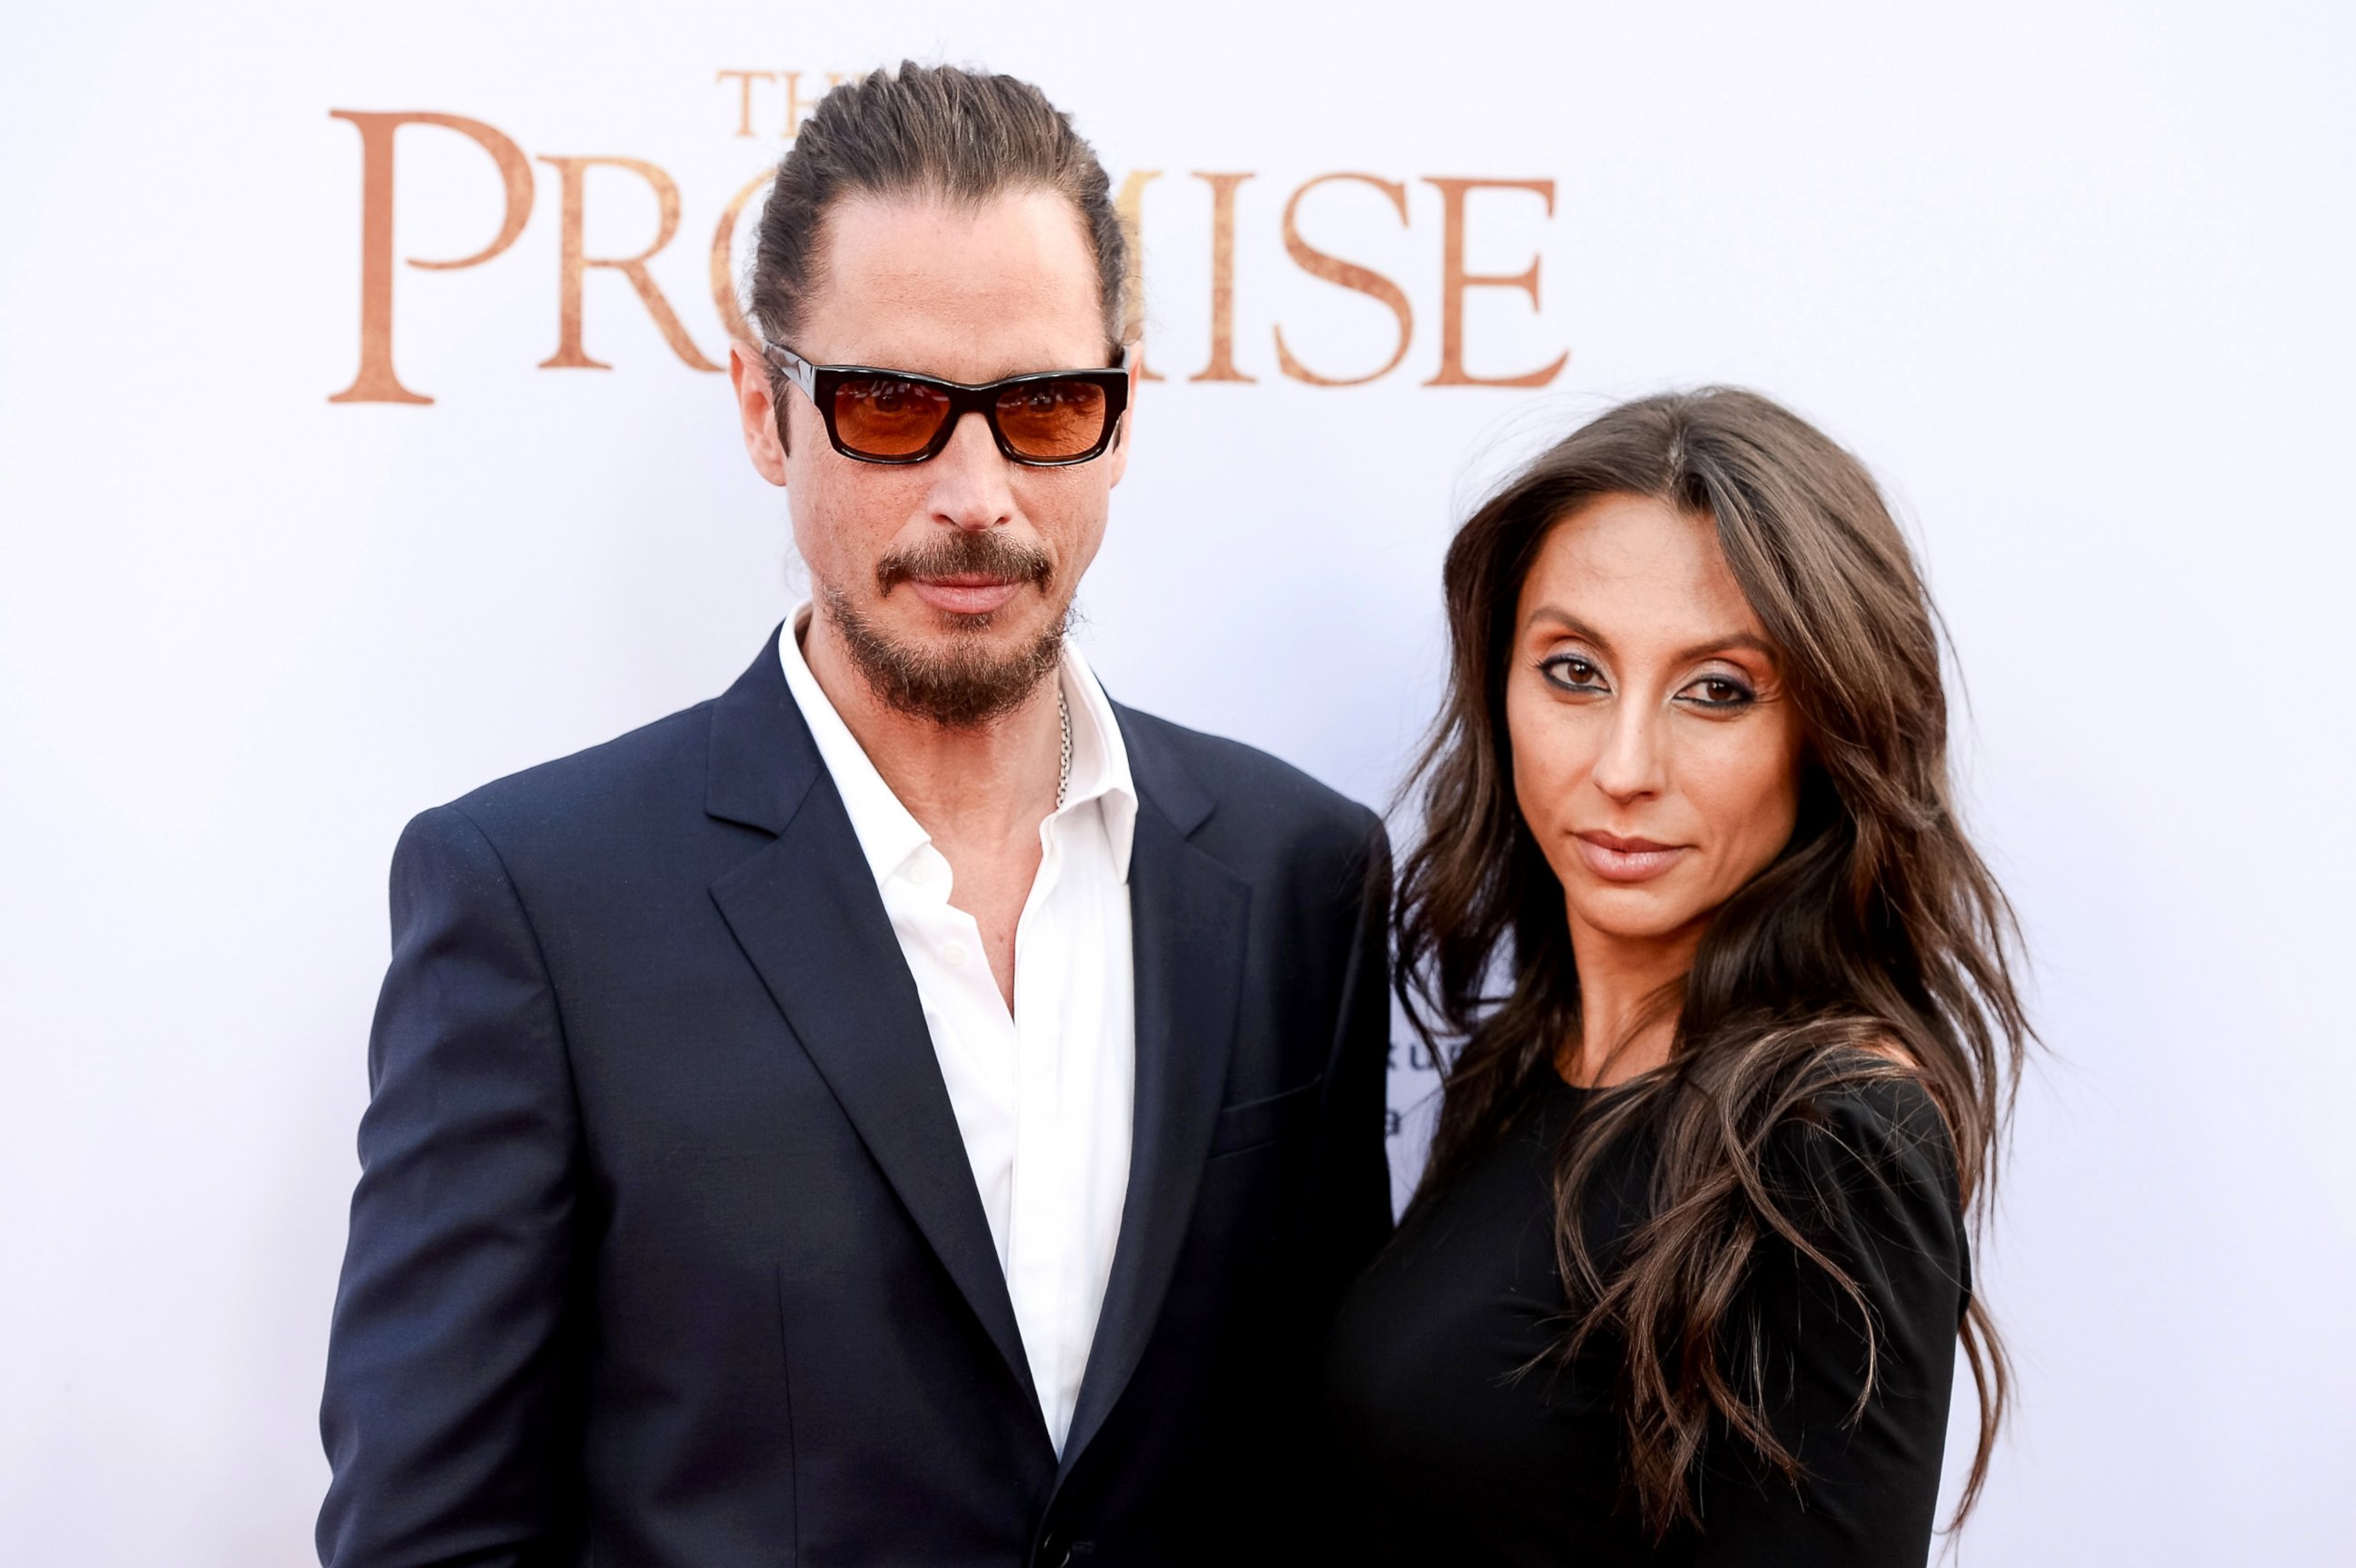 PHOTO: Chris Cornell and Vicky Karayiannis arrive to the Los Angeles premiere of "The Promise" at TCL Chinese Theatre on April 12, 2017, in Hollywood, Calif.